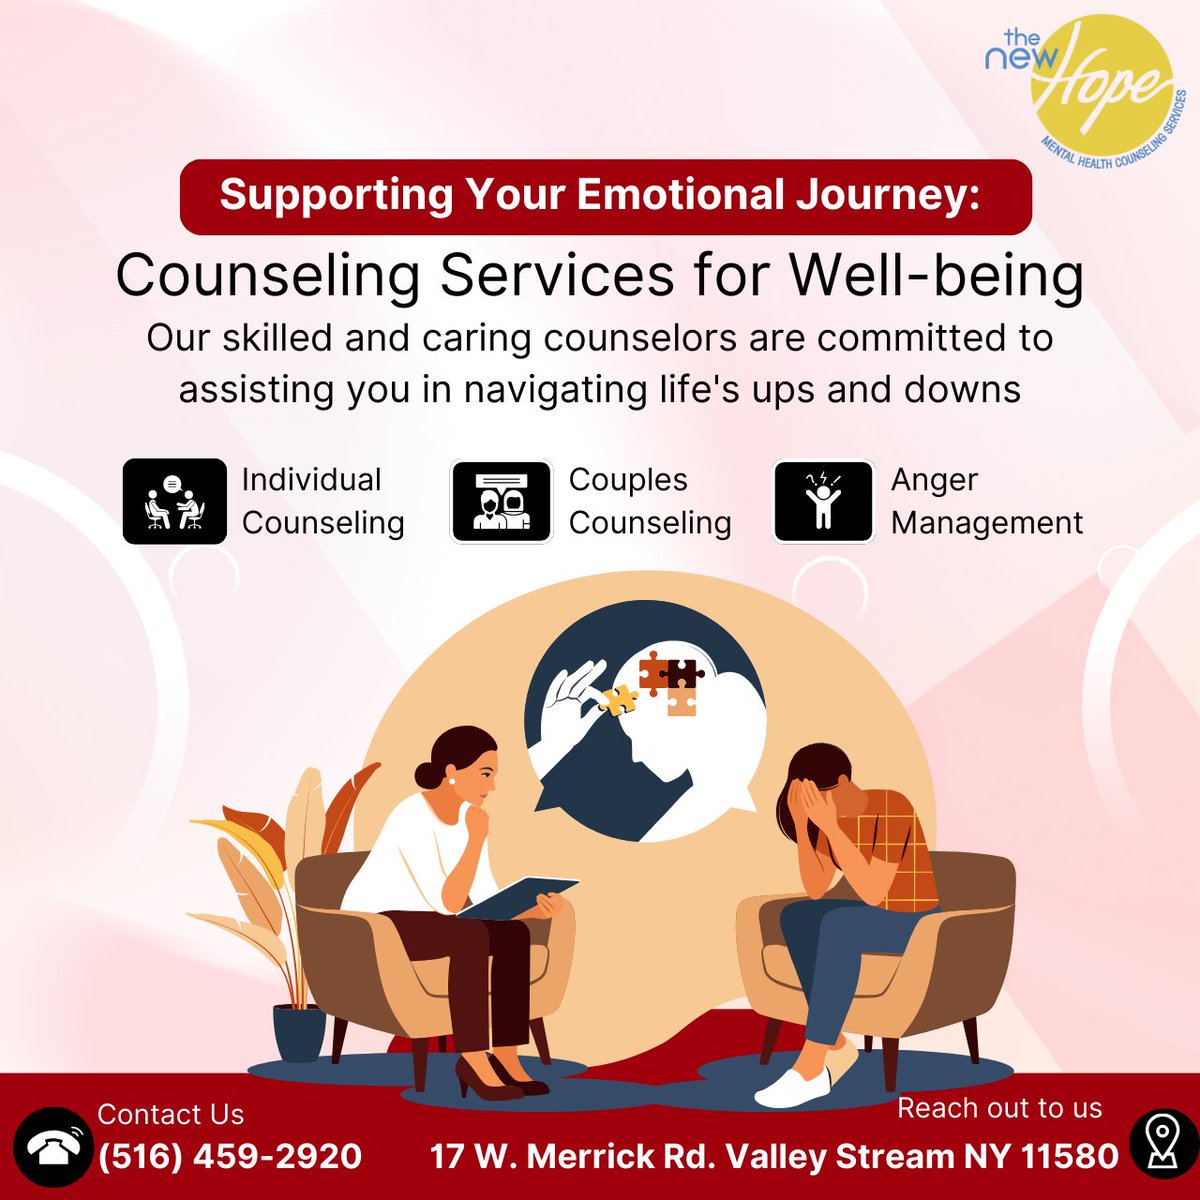 Embark on your emotional healing journey with our compassionate counseling services. 

#mentalhealthcare #couplecounseling #angermanagementtherapy #angermanagementissues #mentalhealthtreatment  #mentalhealthtips #mentalhealthcounseling #mentalhealthcounselor #Thenewhopemhcs